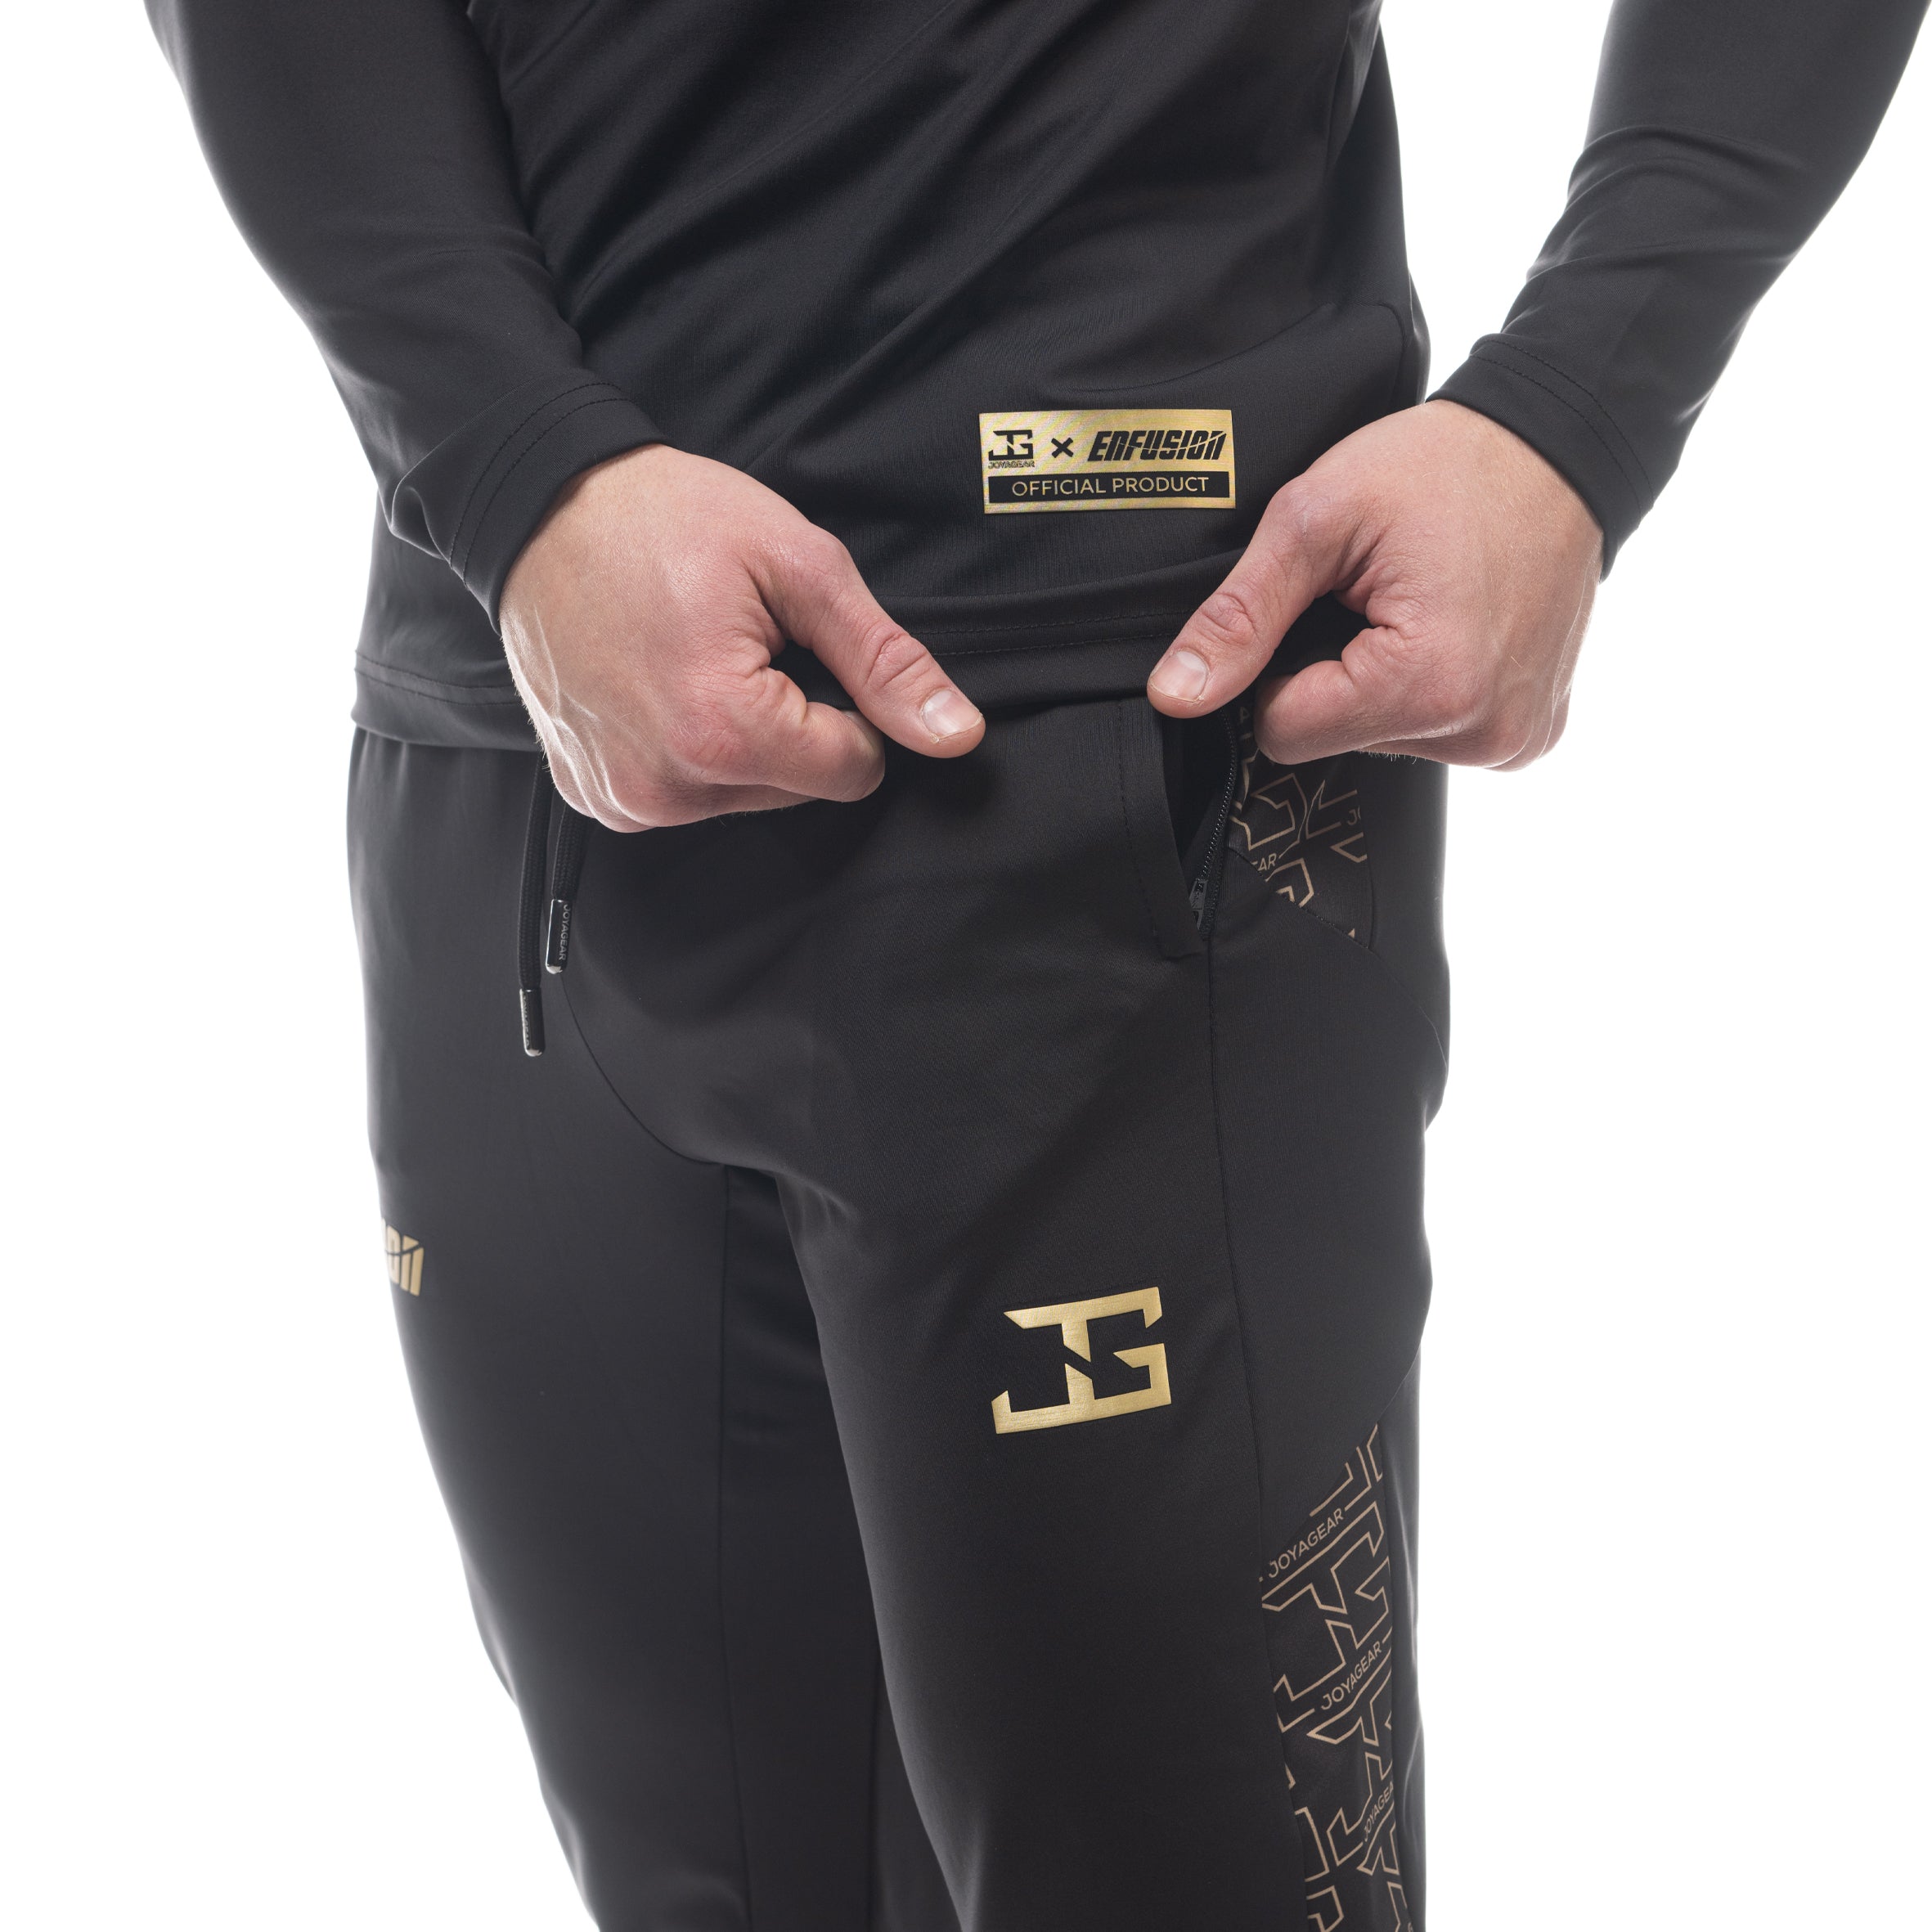 The Enfusion "Trilogy" Tracksuit – Black/Gold